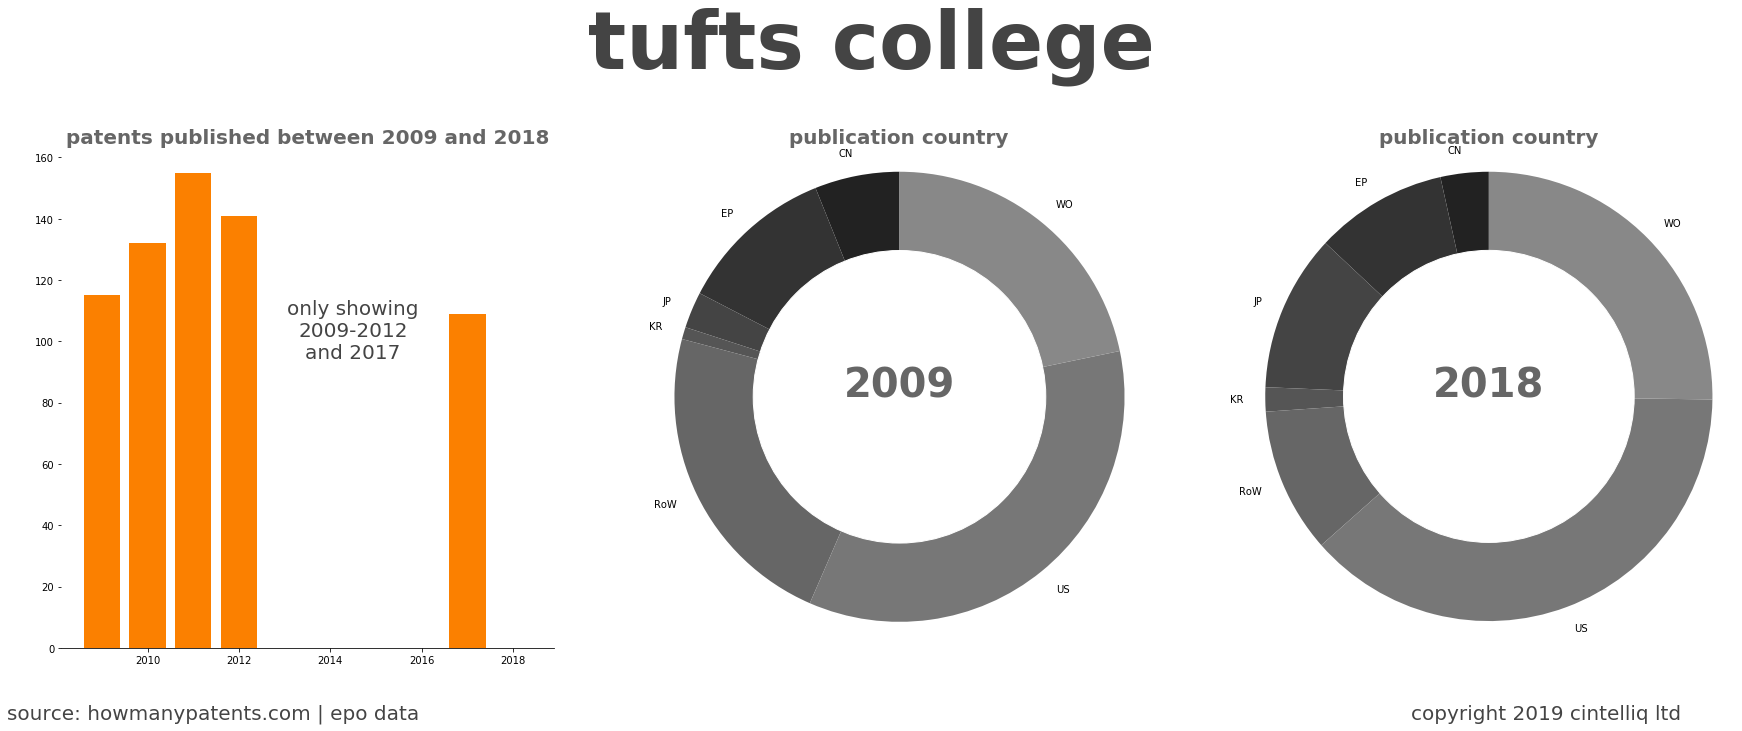 summary of patents for Tufts College